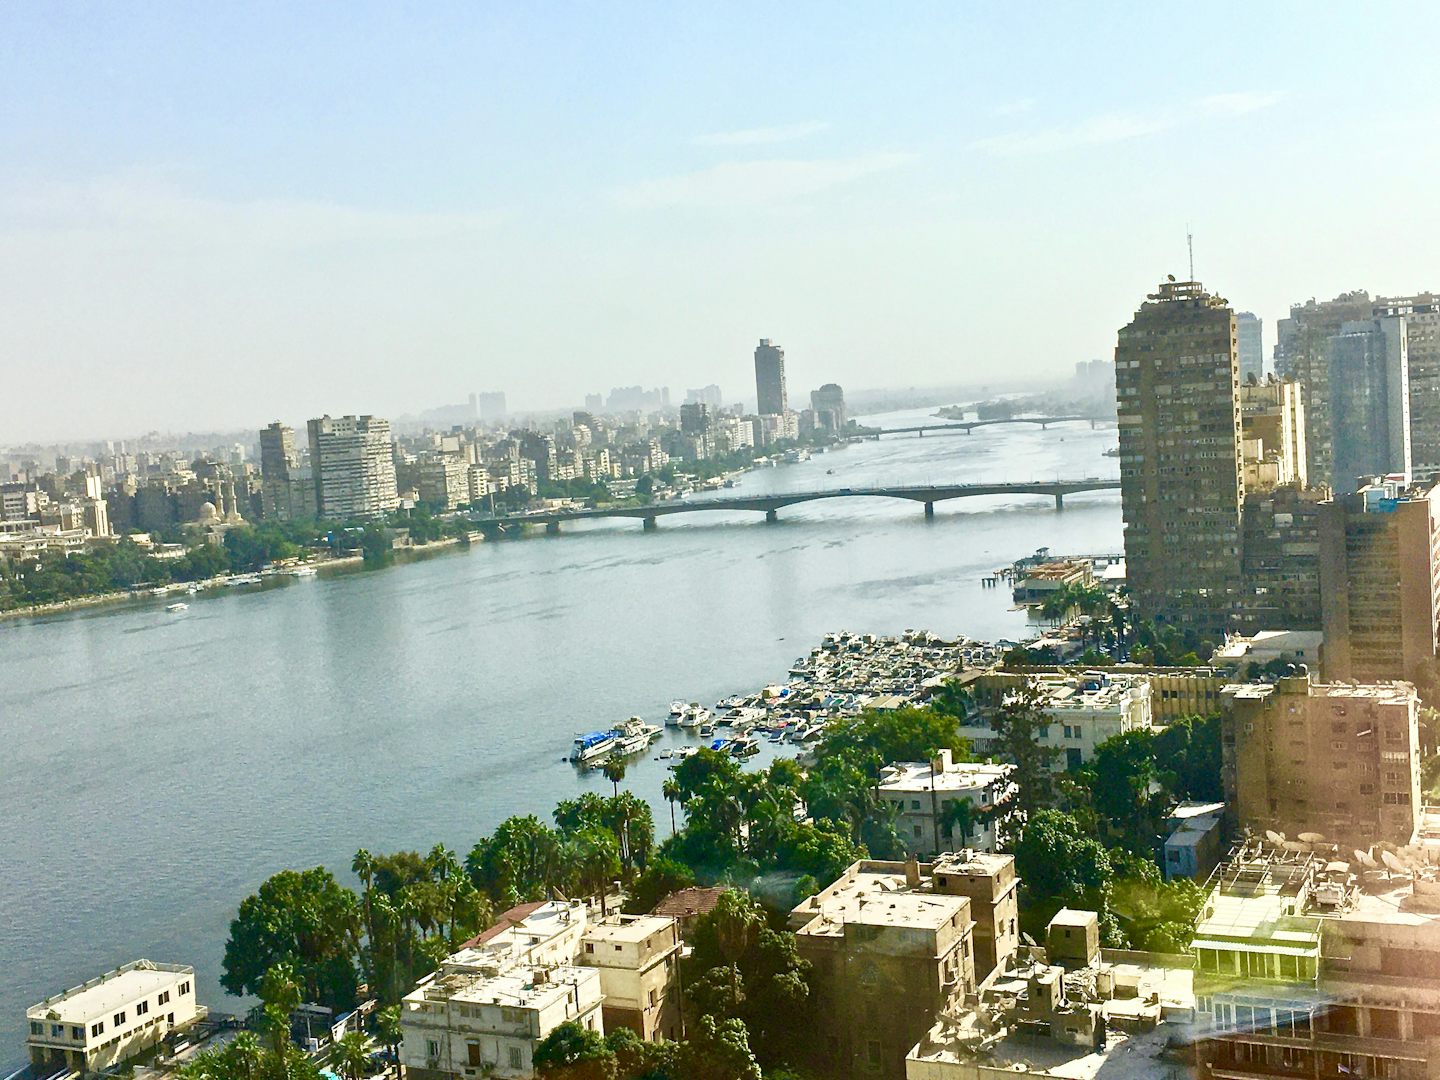 View of the Nile from our room at Sheraton Cairo Hotel